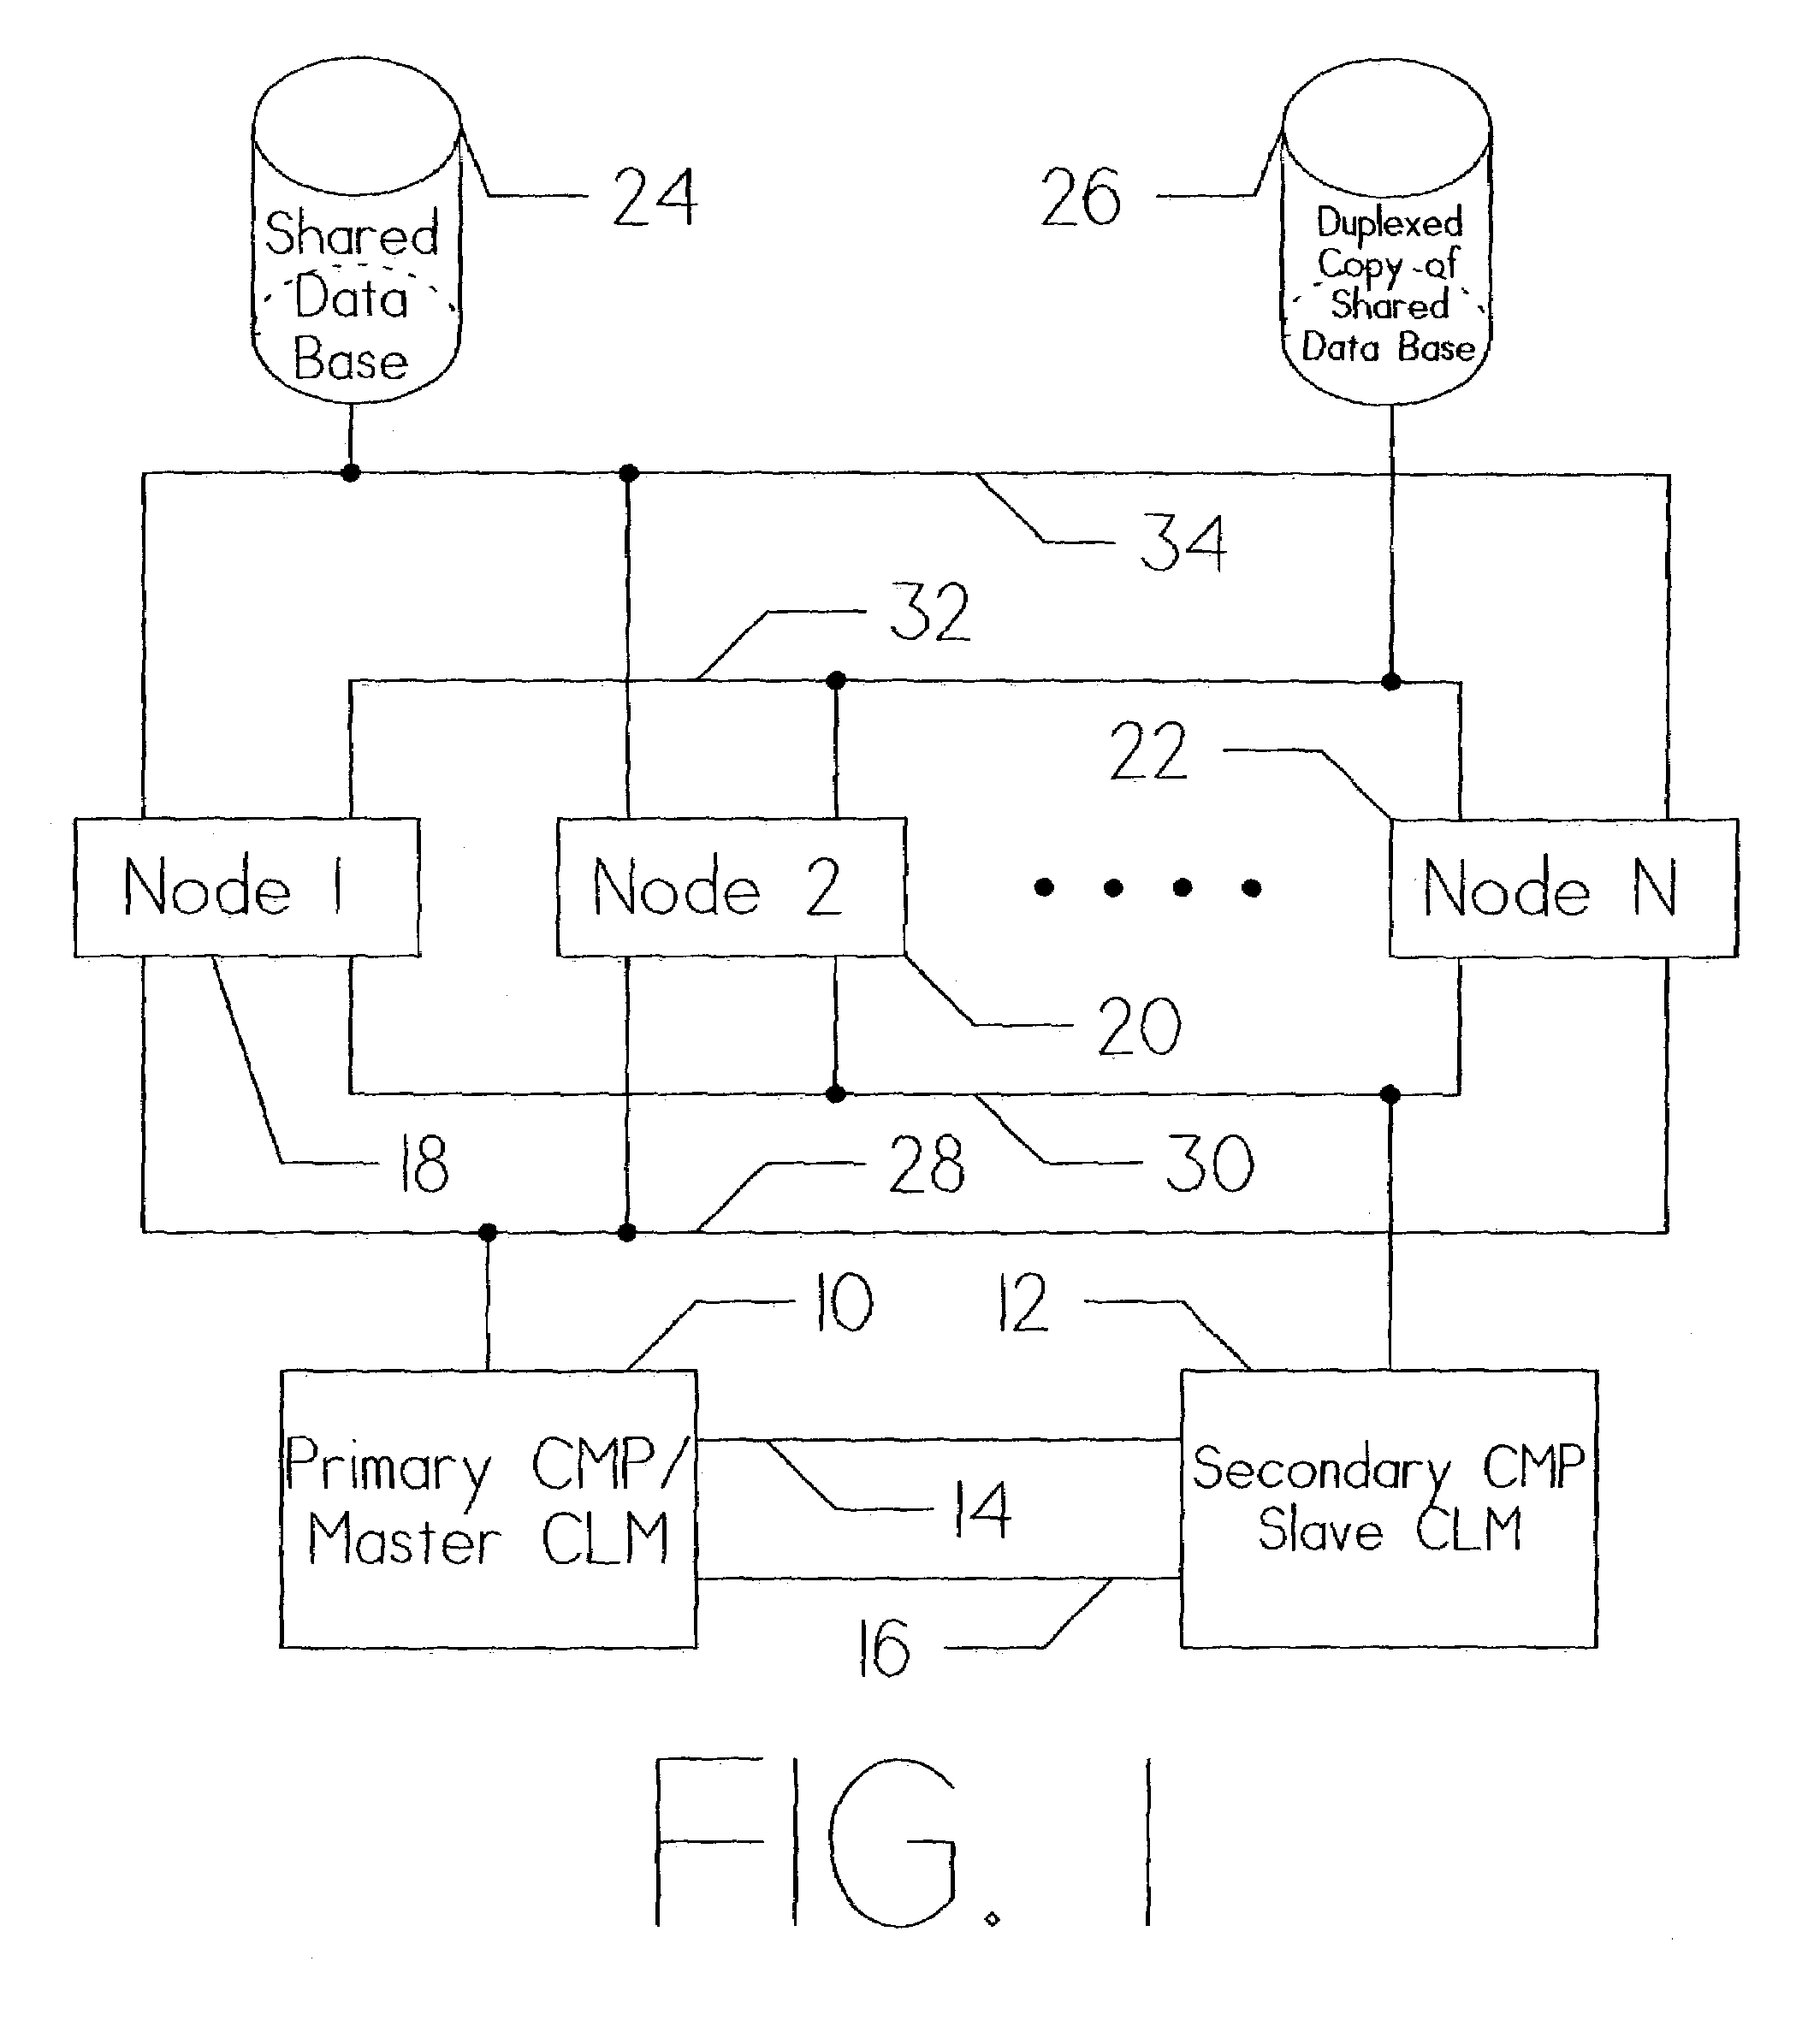 Method for allowing a clustered computer systems manager to use disparate hardware on each of the separate servers utilized for redundancy